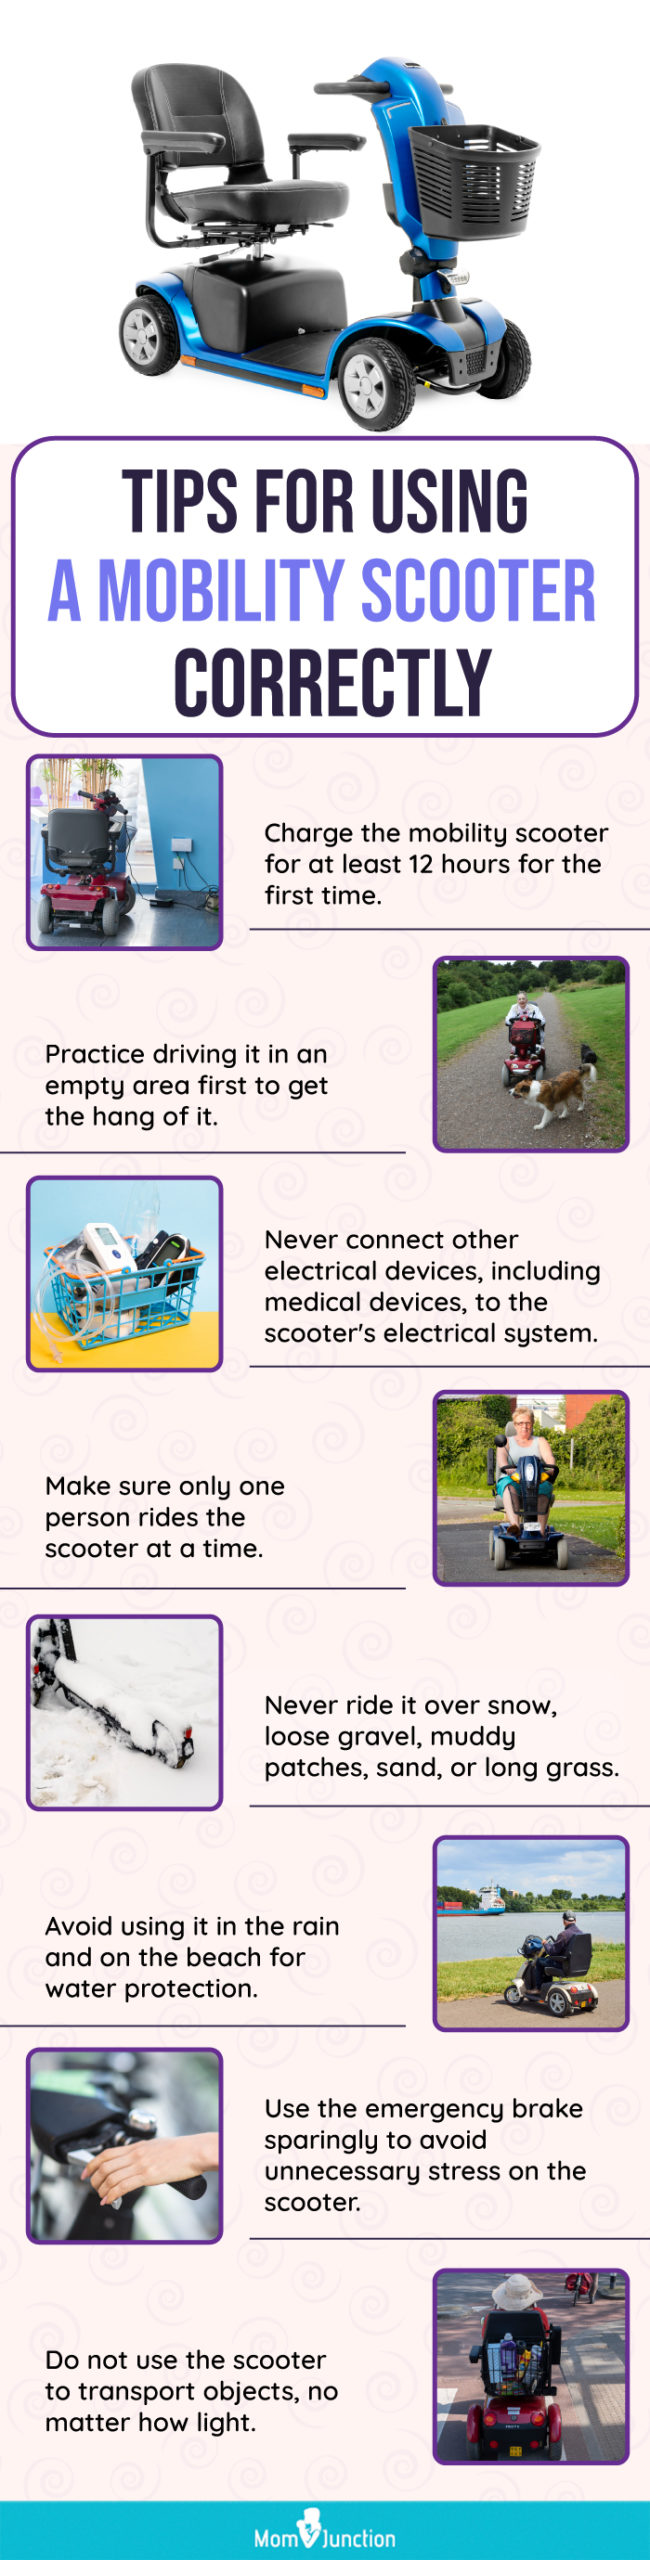 Tips For Using A Mobility Scooter Correctly (infographic)